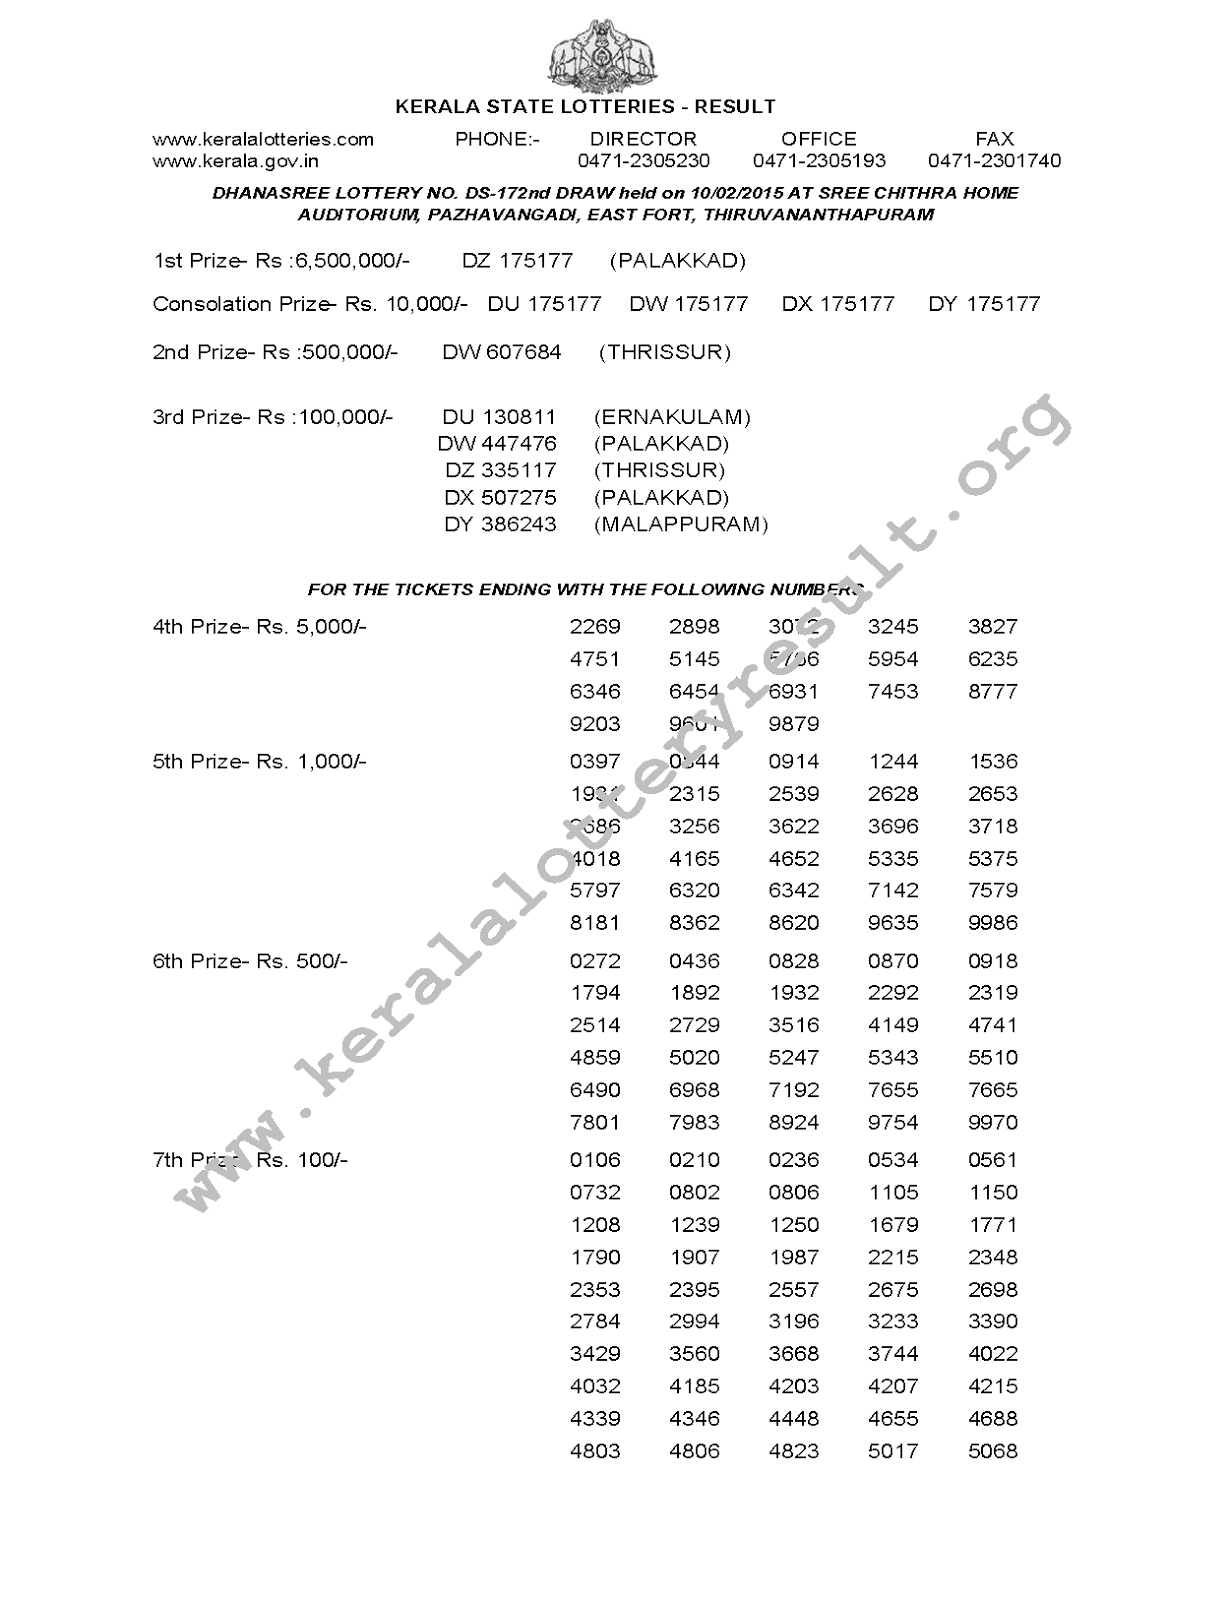 Dhanasree Lottery DS-172 Result 10-2-2015